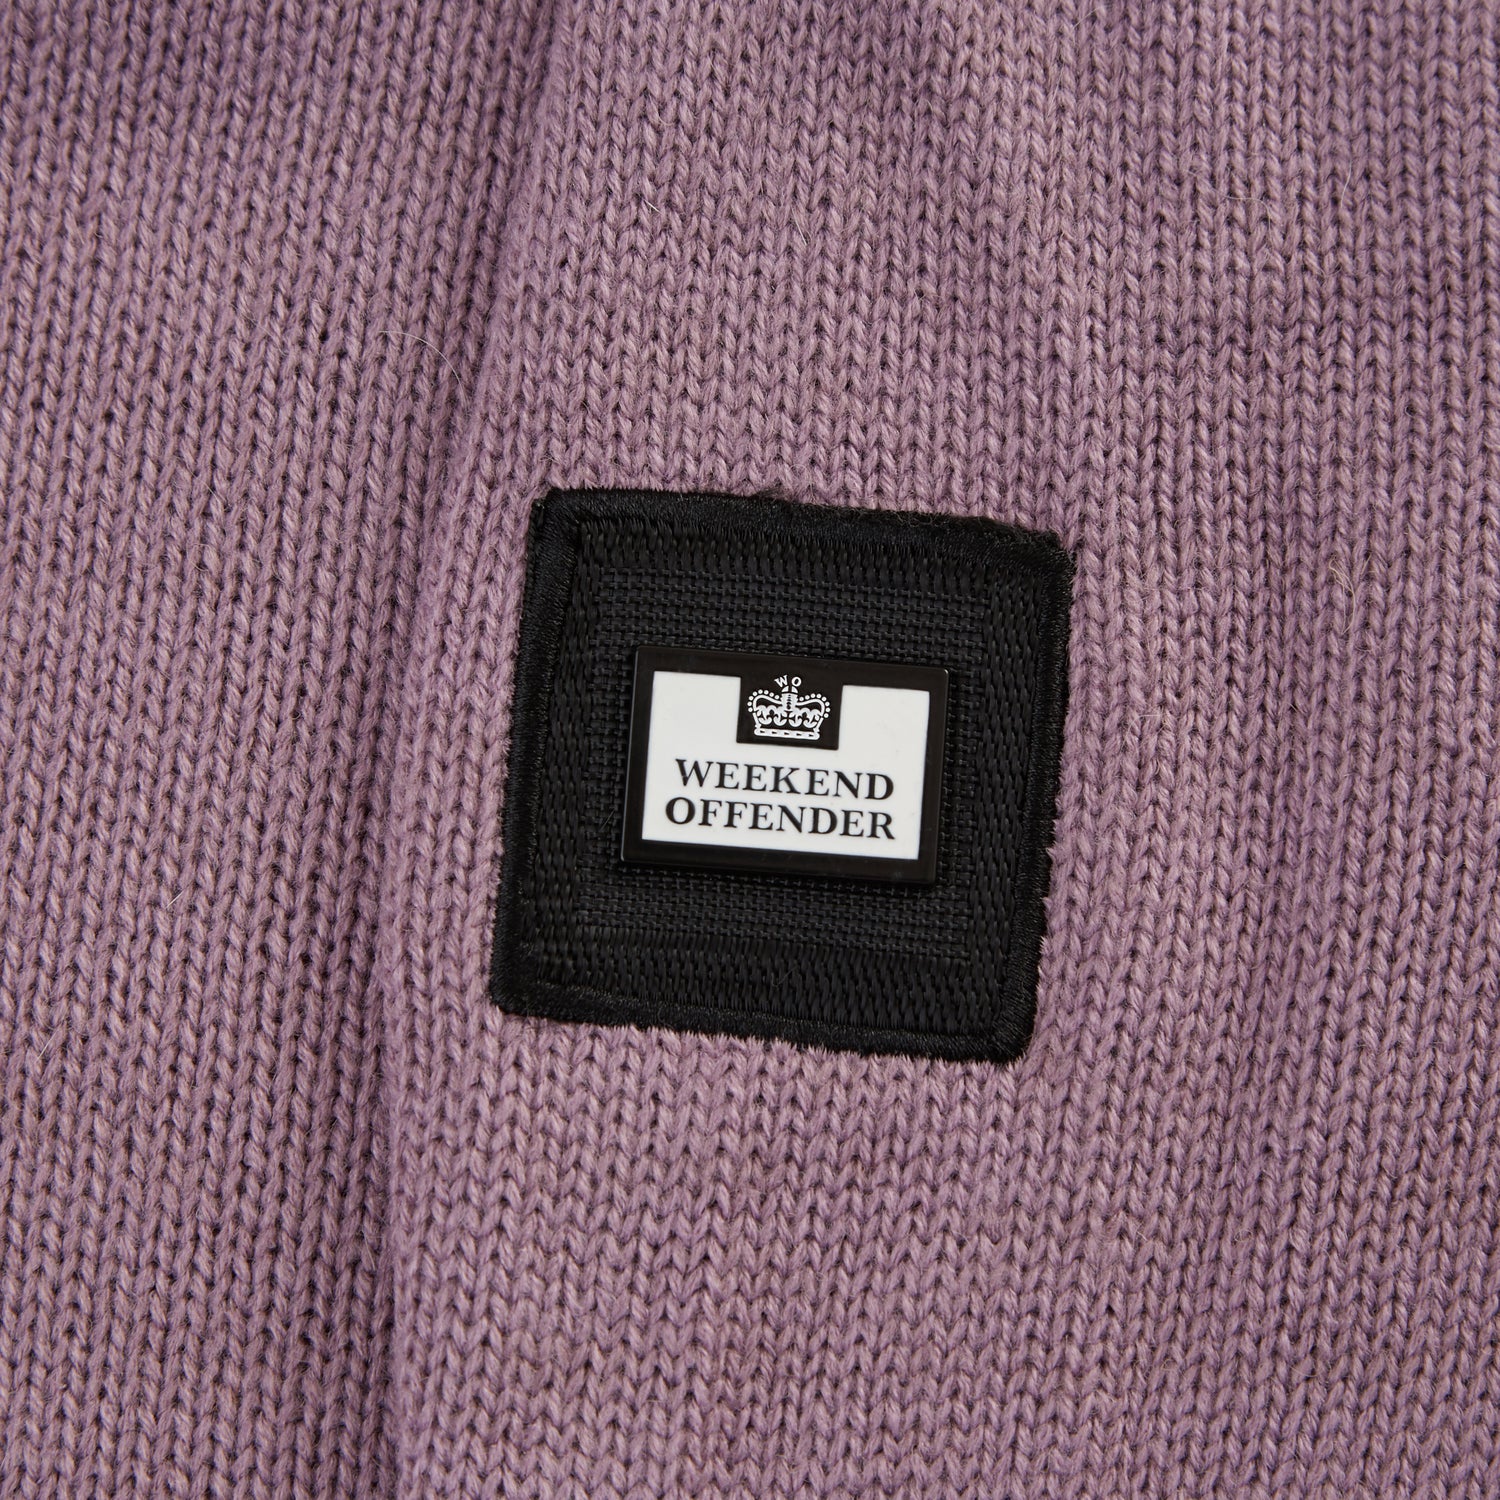 Weekend Offender Knitted Fishermans Crewneck Sweater - Cardona